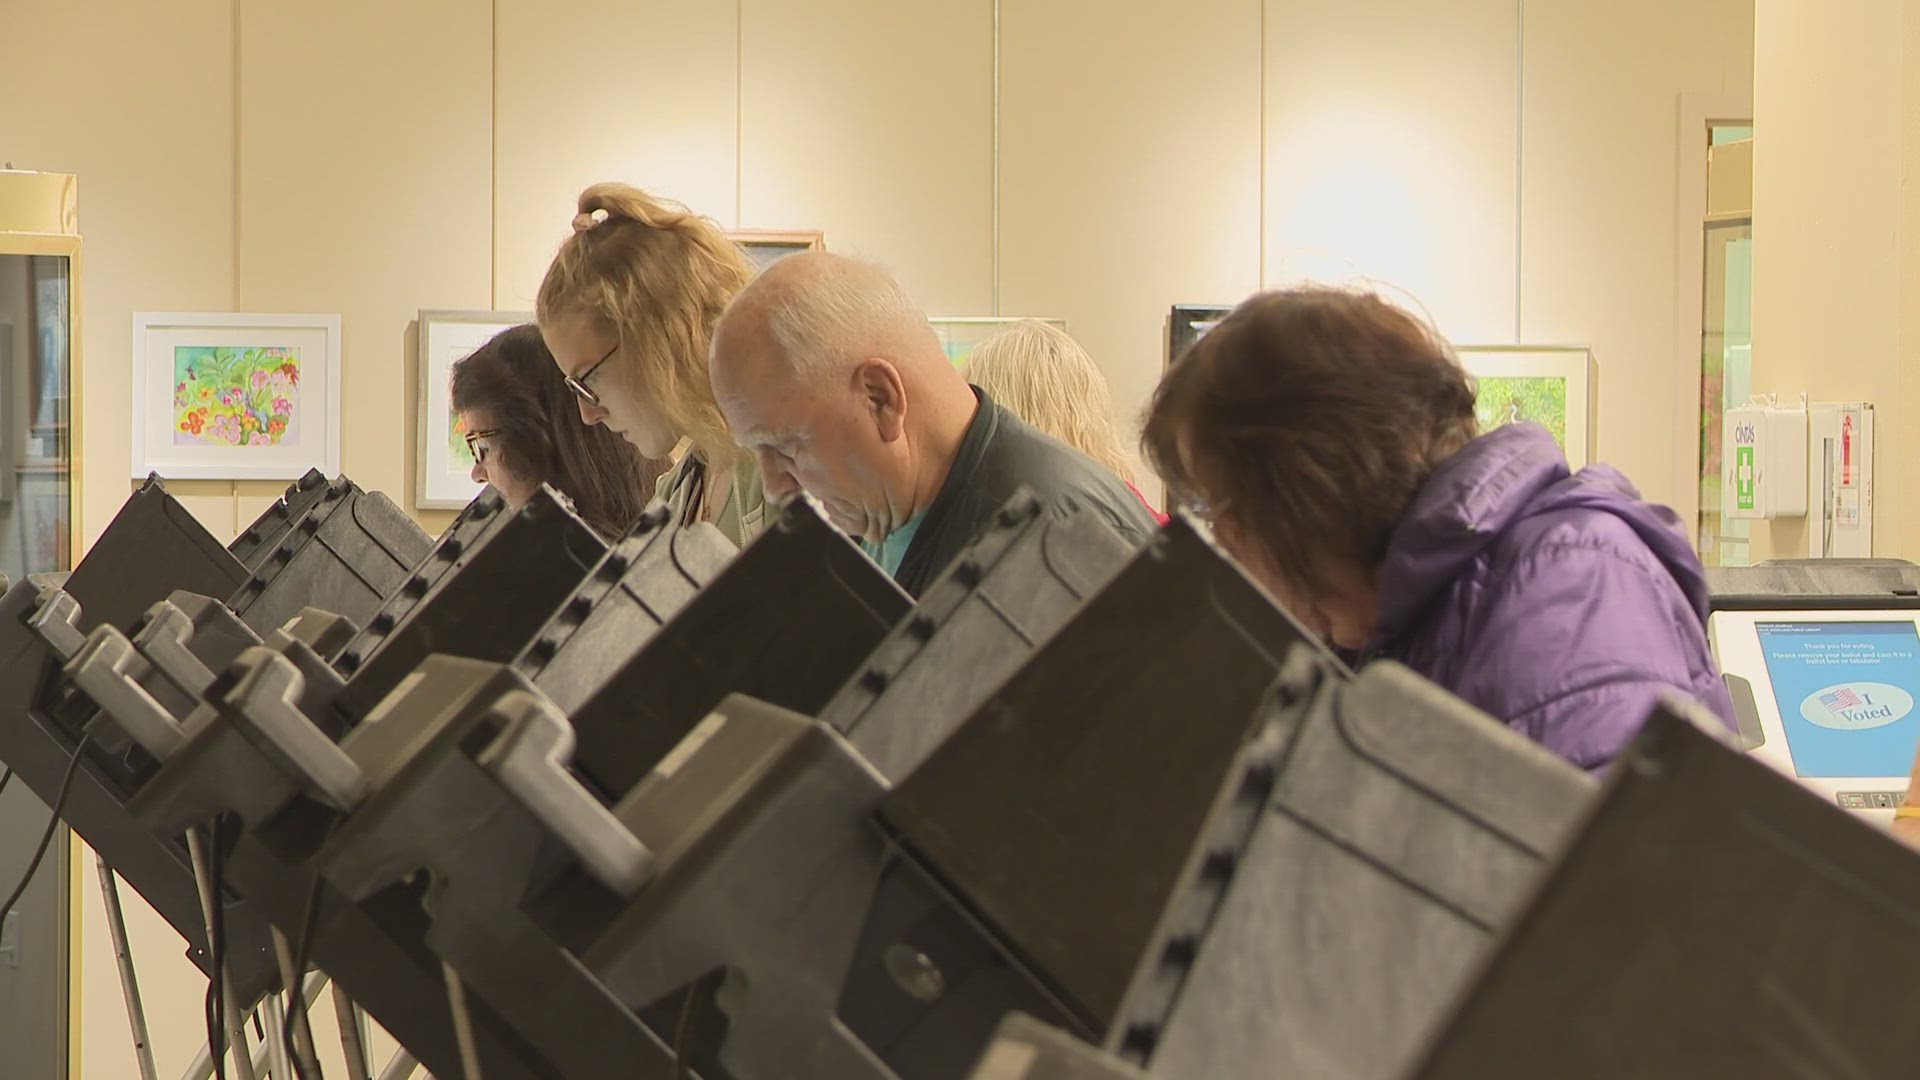 The polls are open in Ohio from 6:30 a.m. until 7:30 p.m.